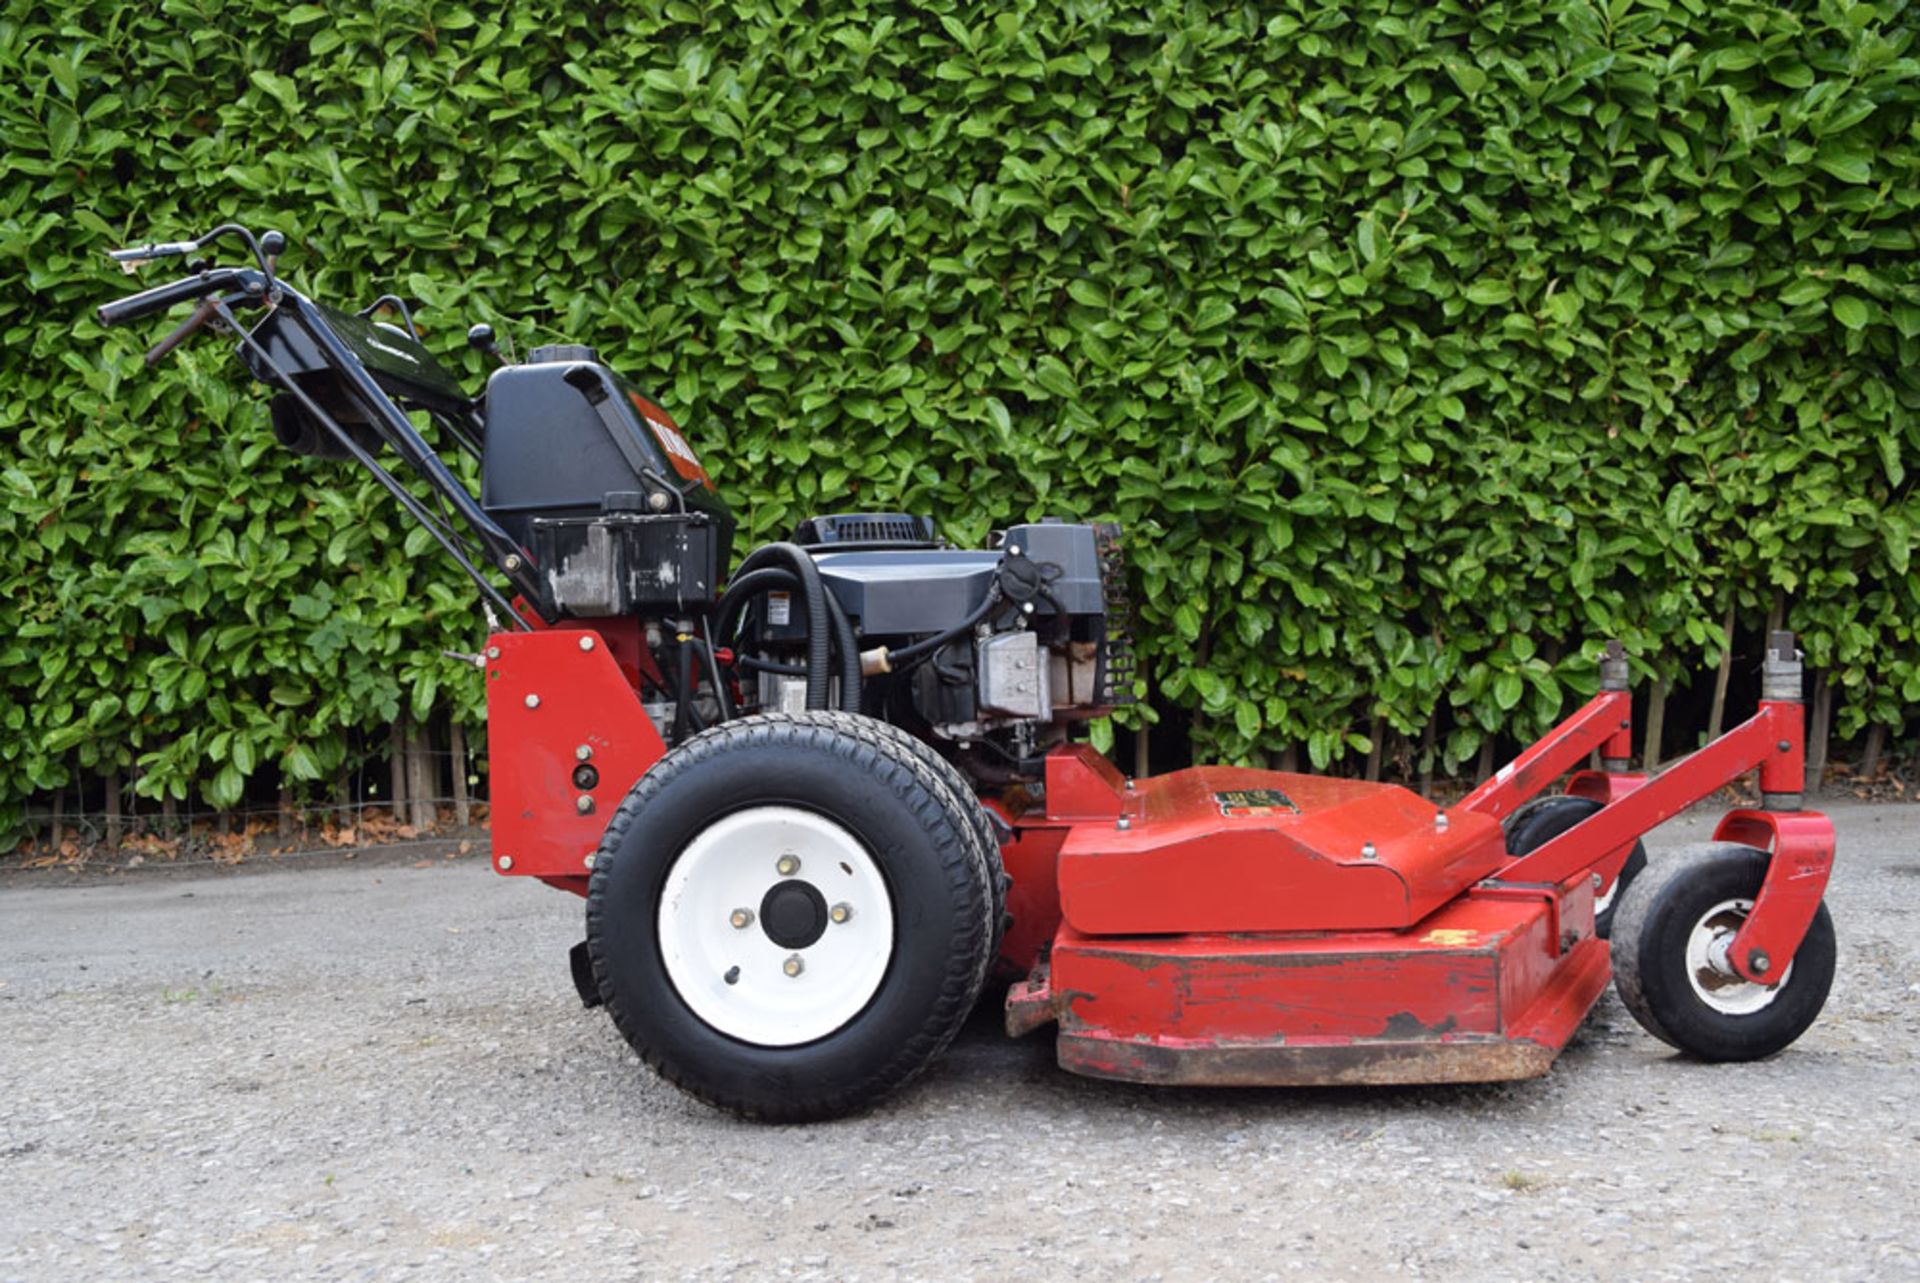 2009 Toro Commercial Pedestrian 48" Commercial Walk Behind Zero Turn Rotary Mower - Image 5 of 7